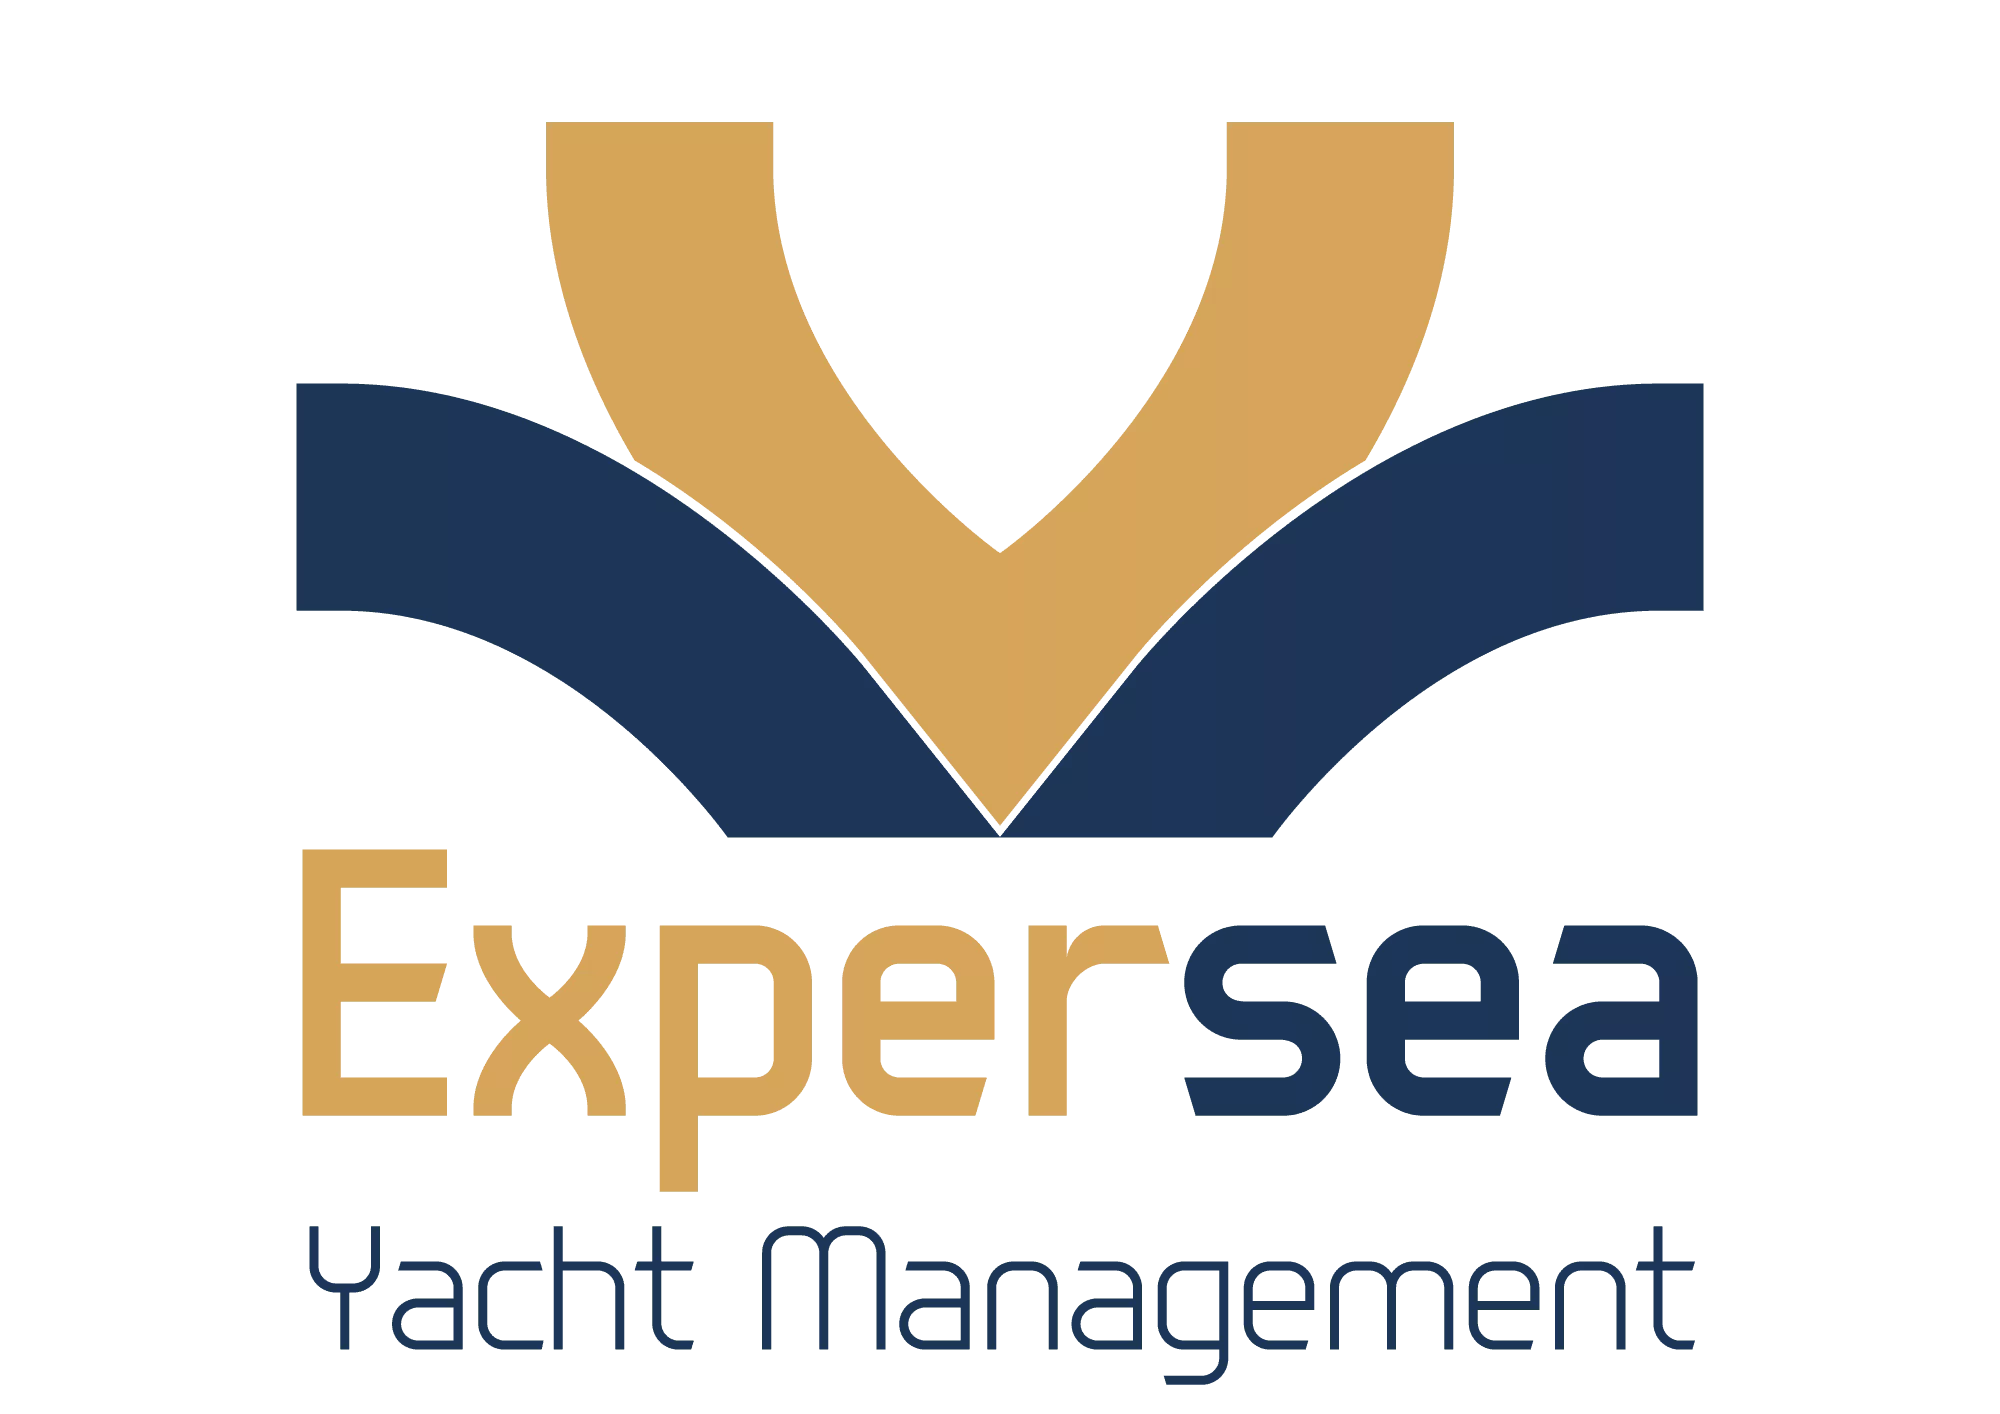 Expersea Yacht Management logo